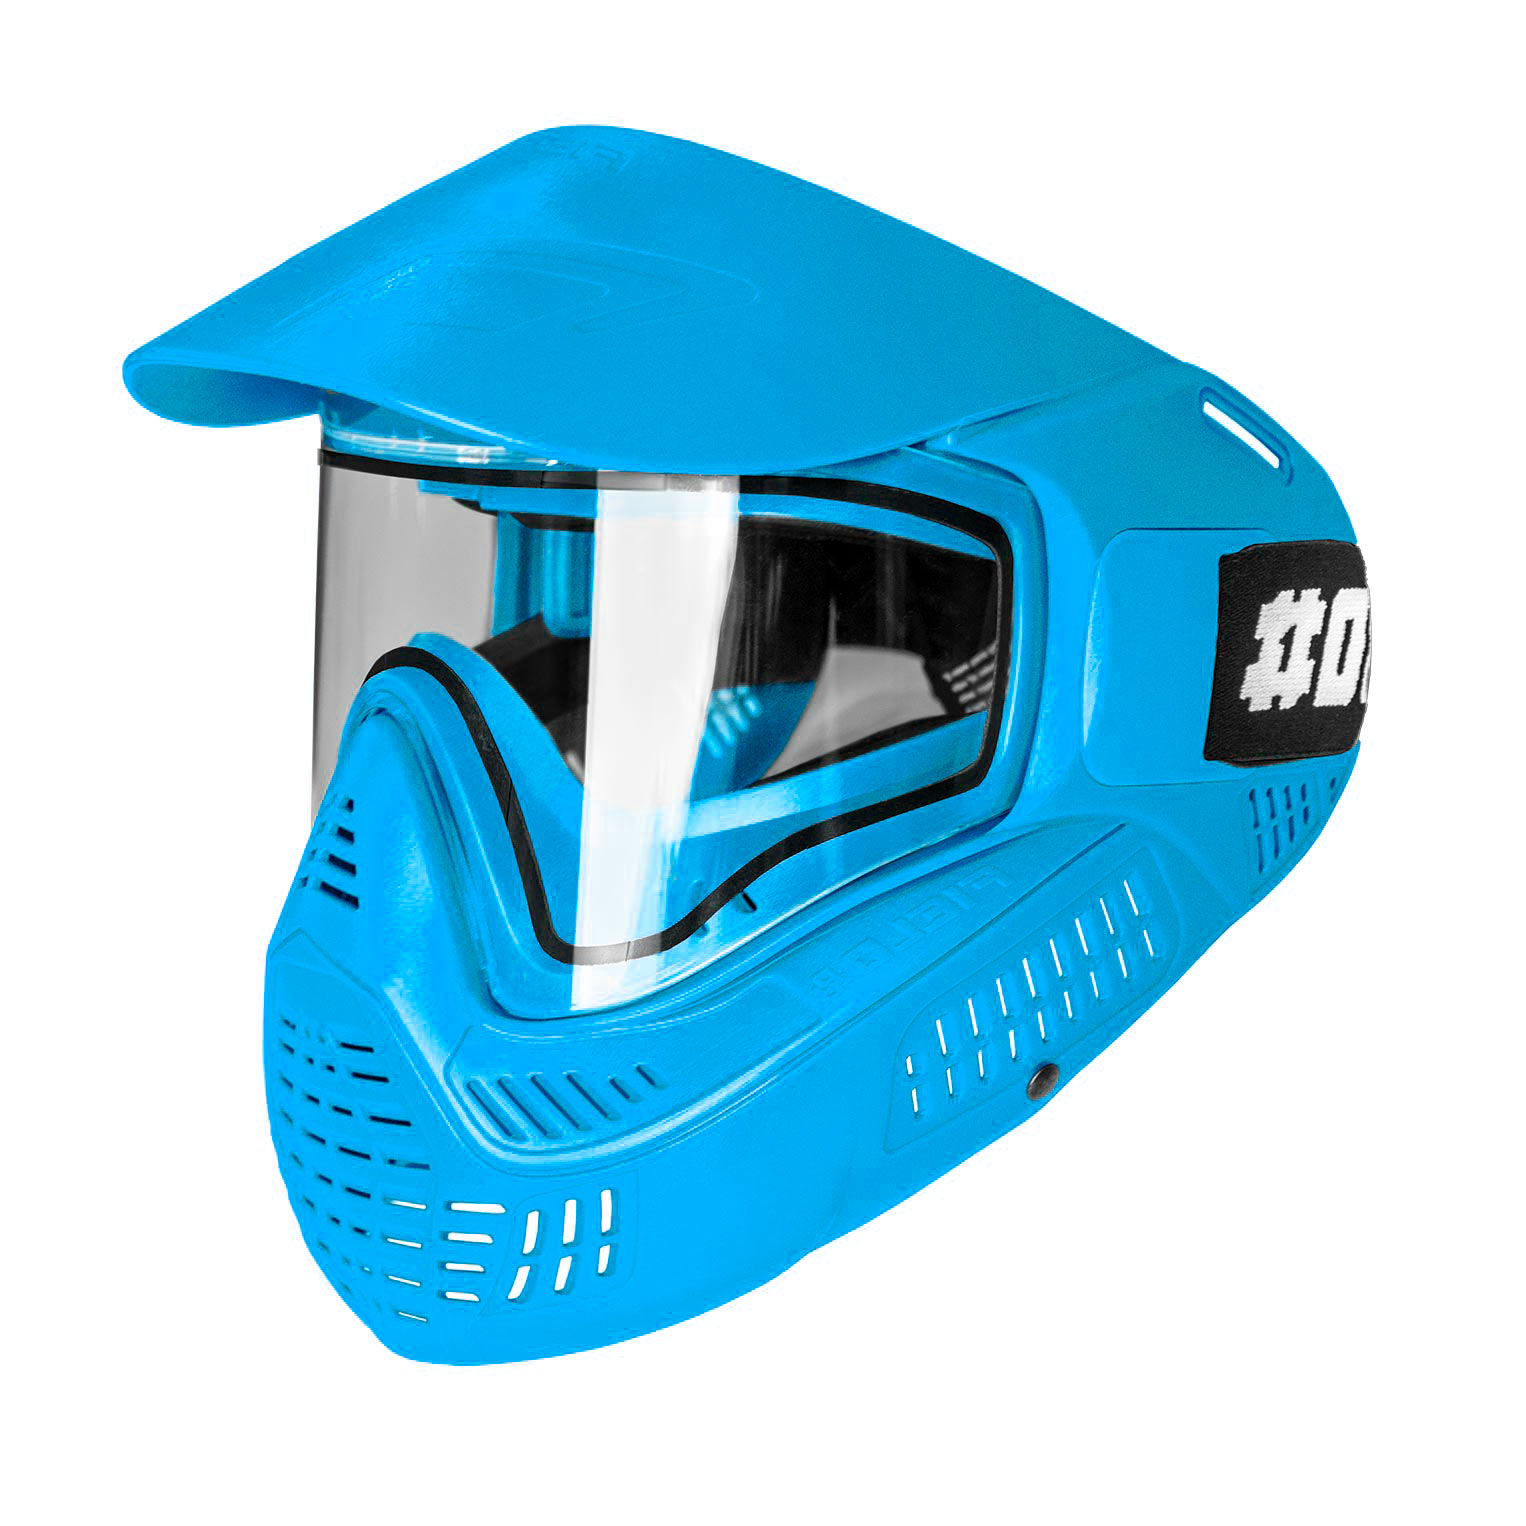 FIELDpb ONE Goggle Blue (Thermal Lens) Rubber Foam